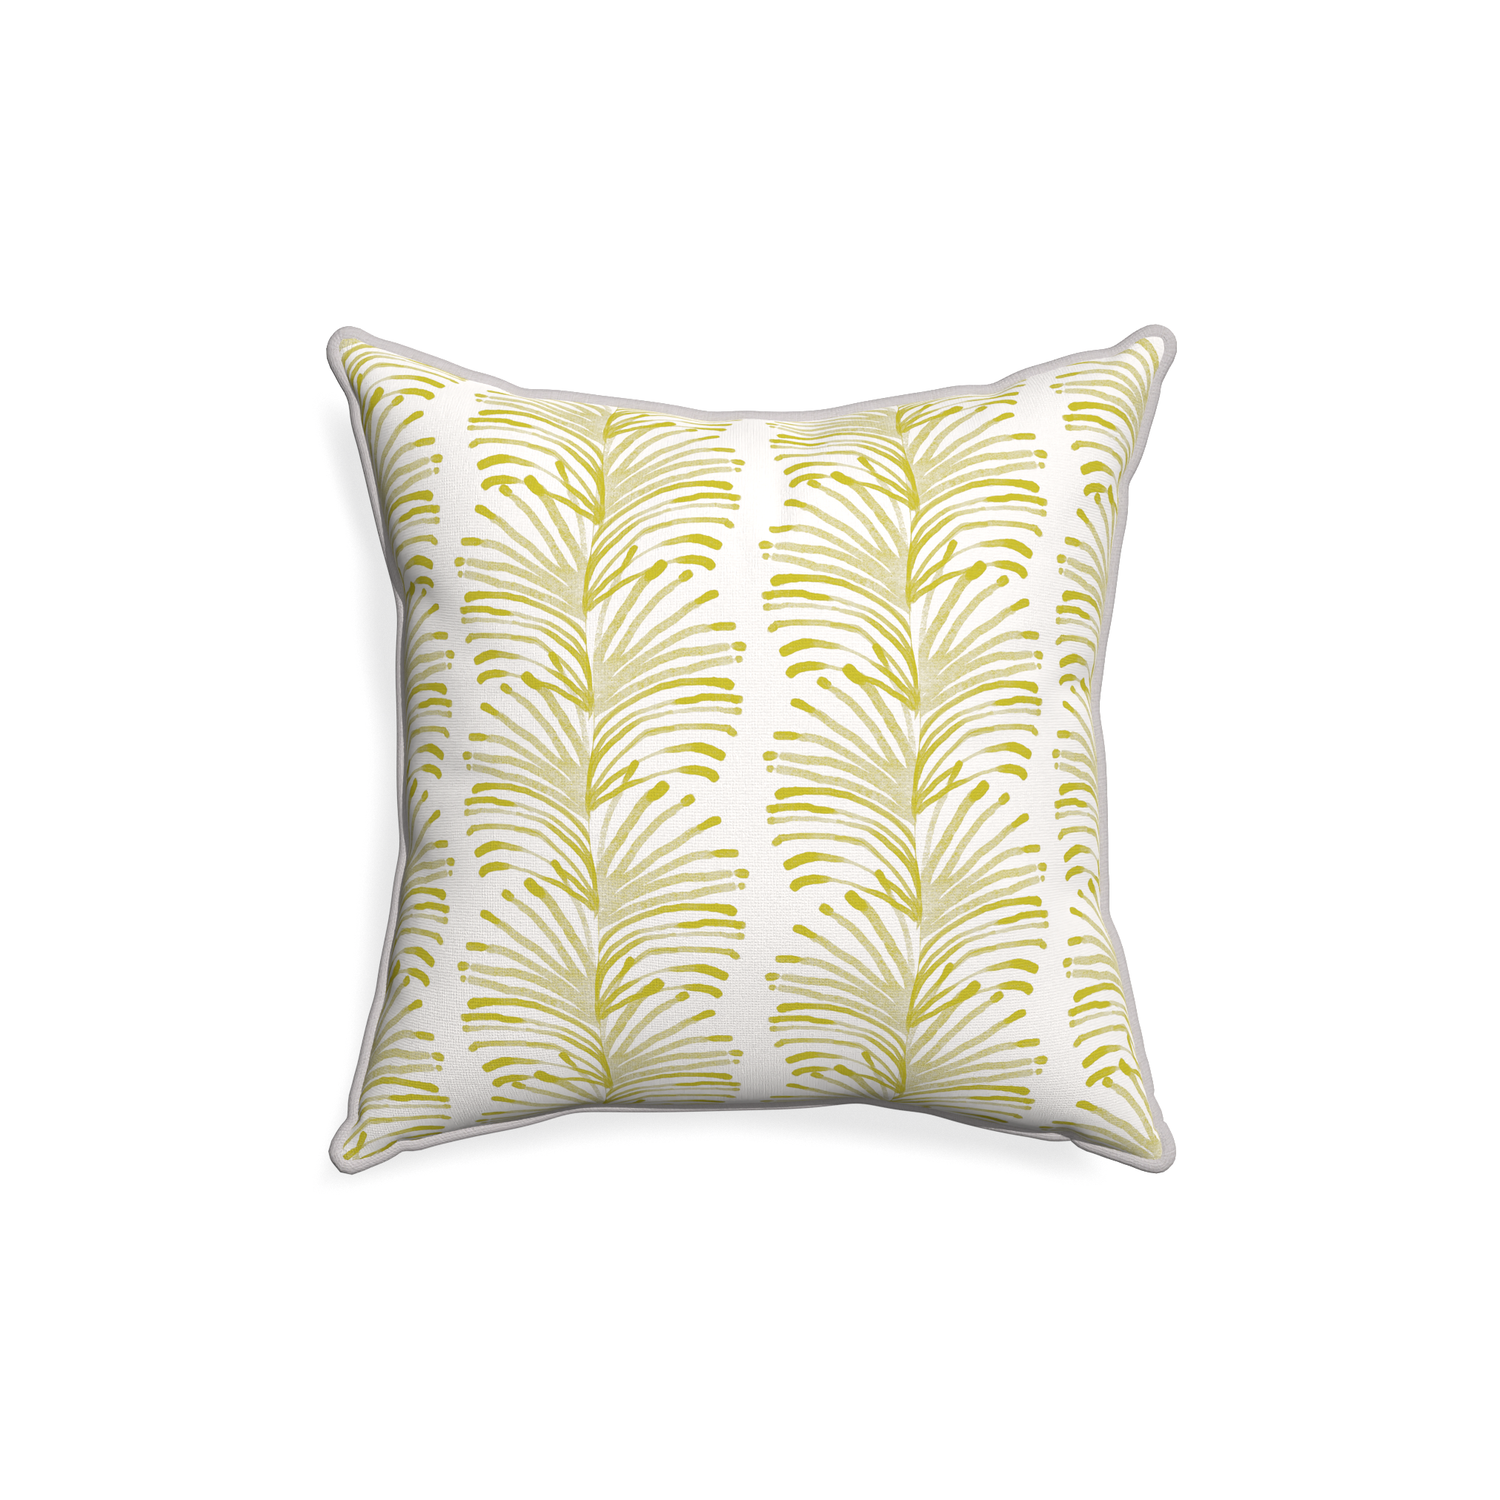 18-square emma chartreuse custom pillow with pebble piping on white background